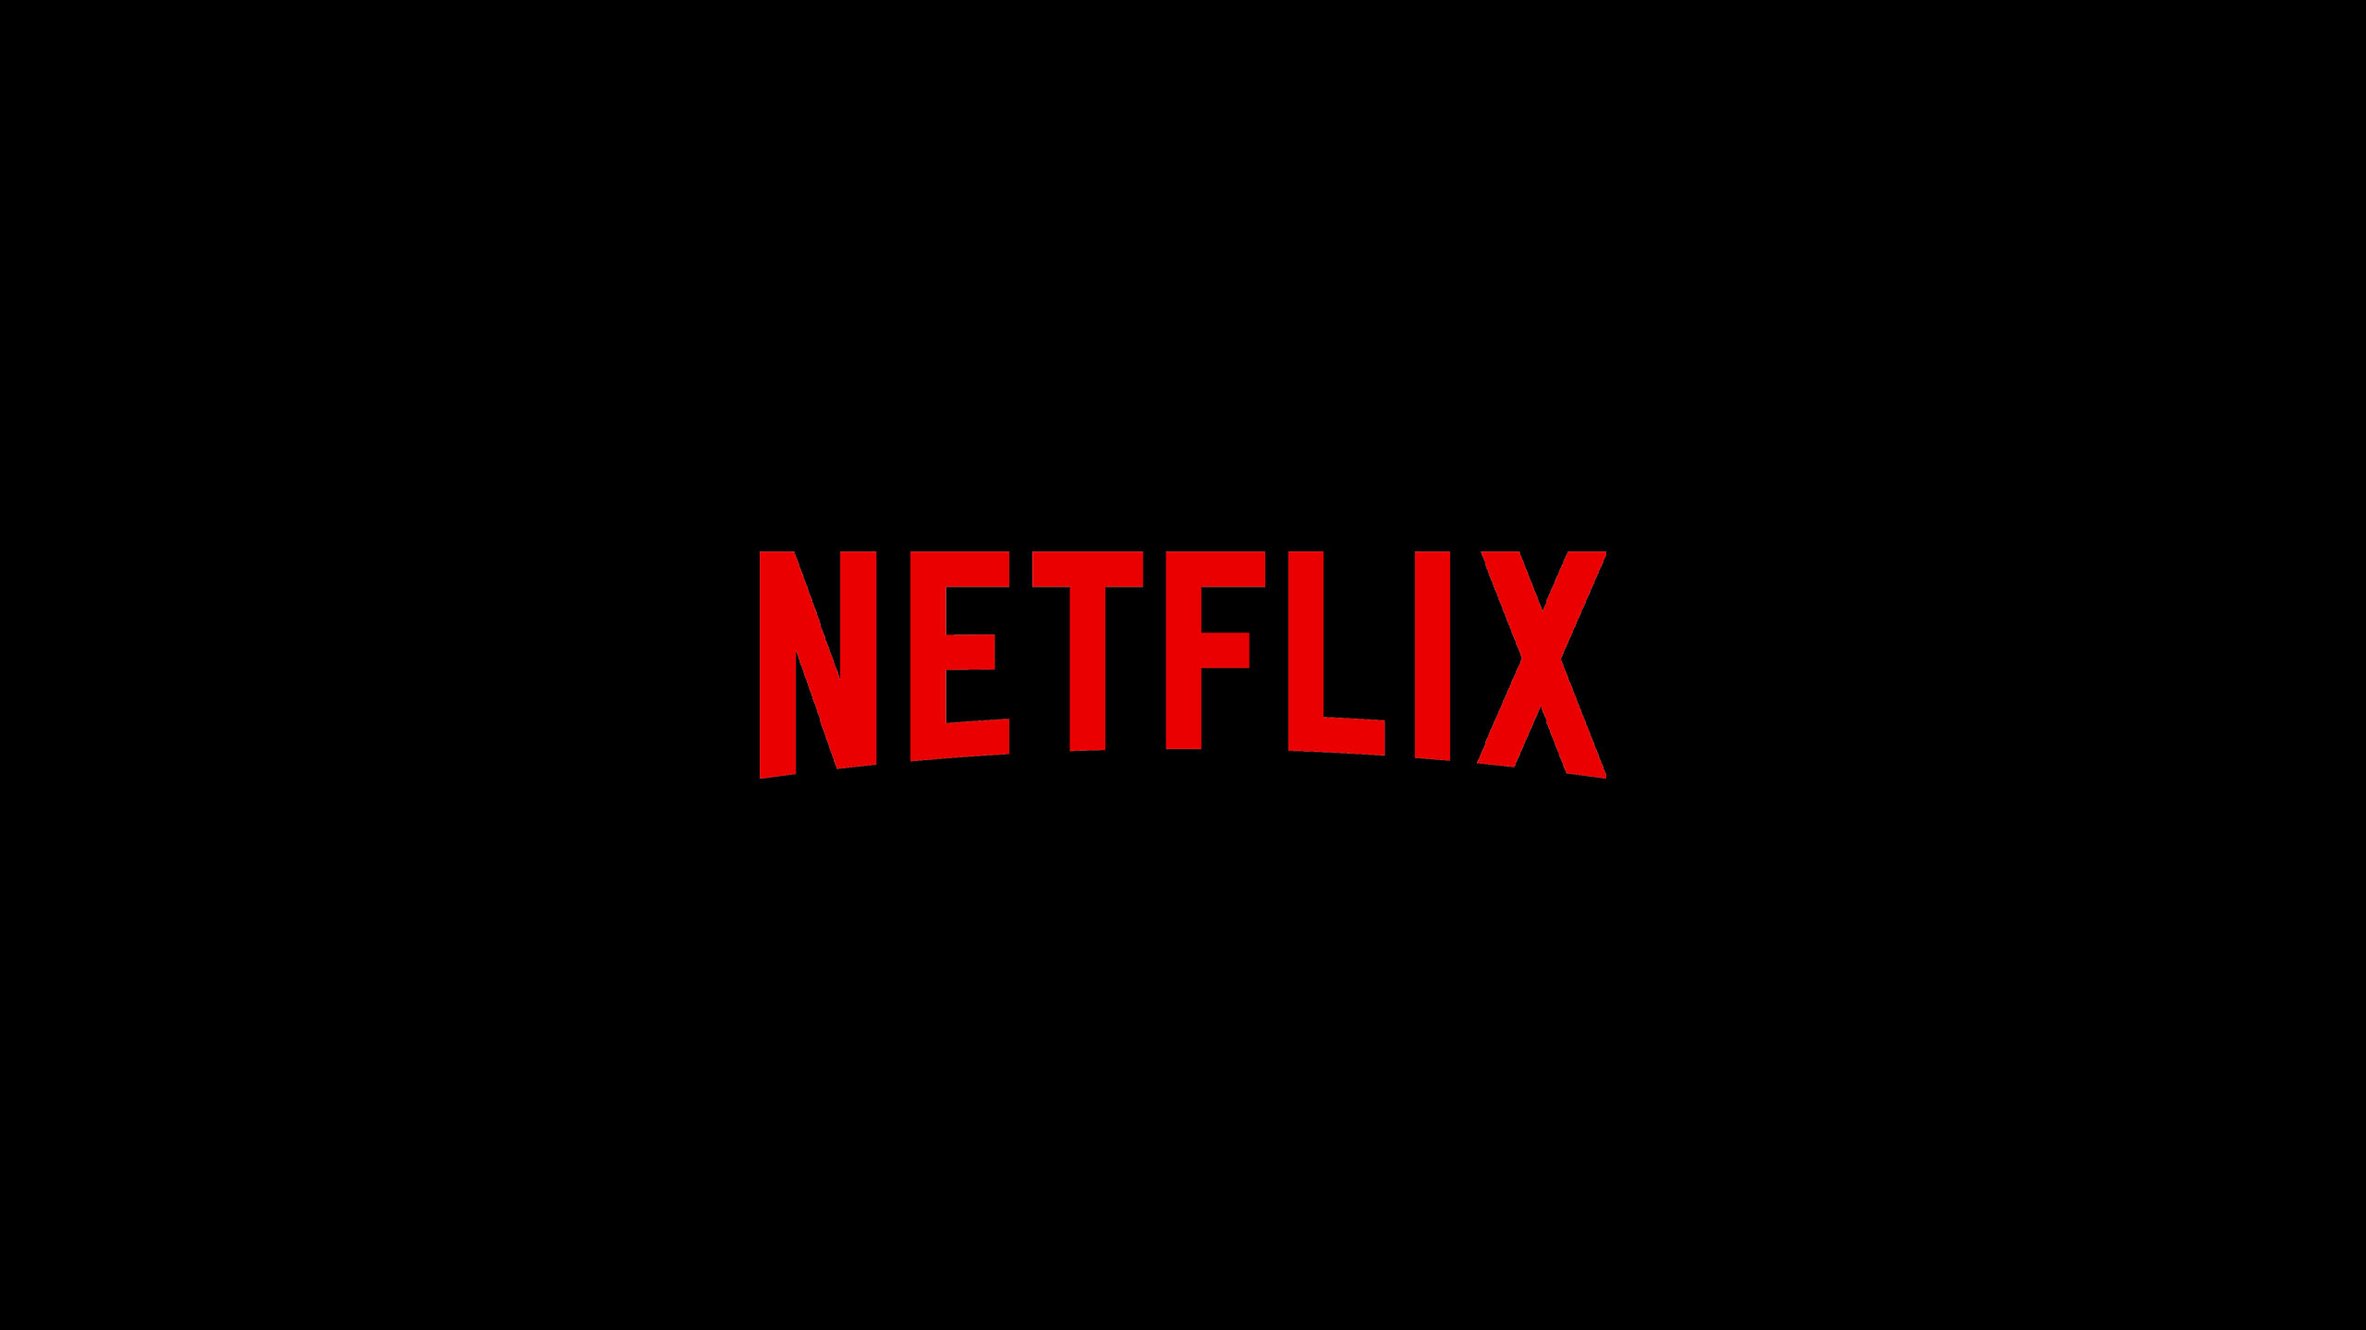 Casting Female Stand-In's For A New Netflix Series